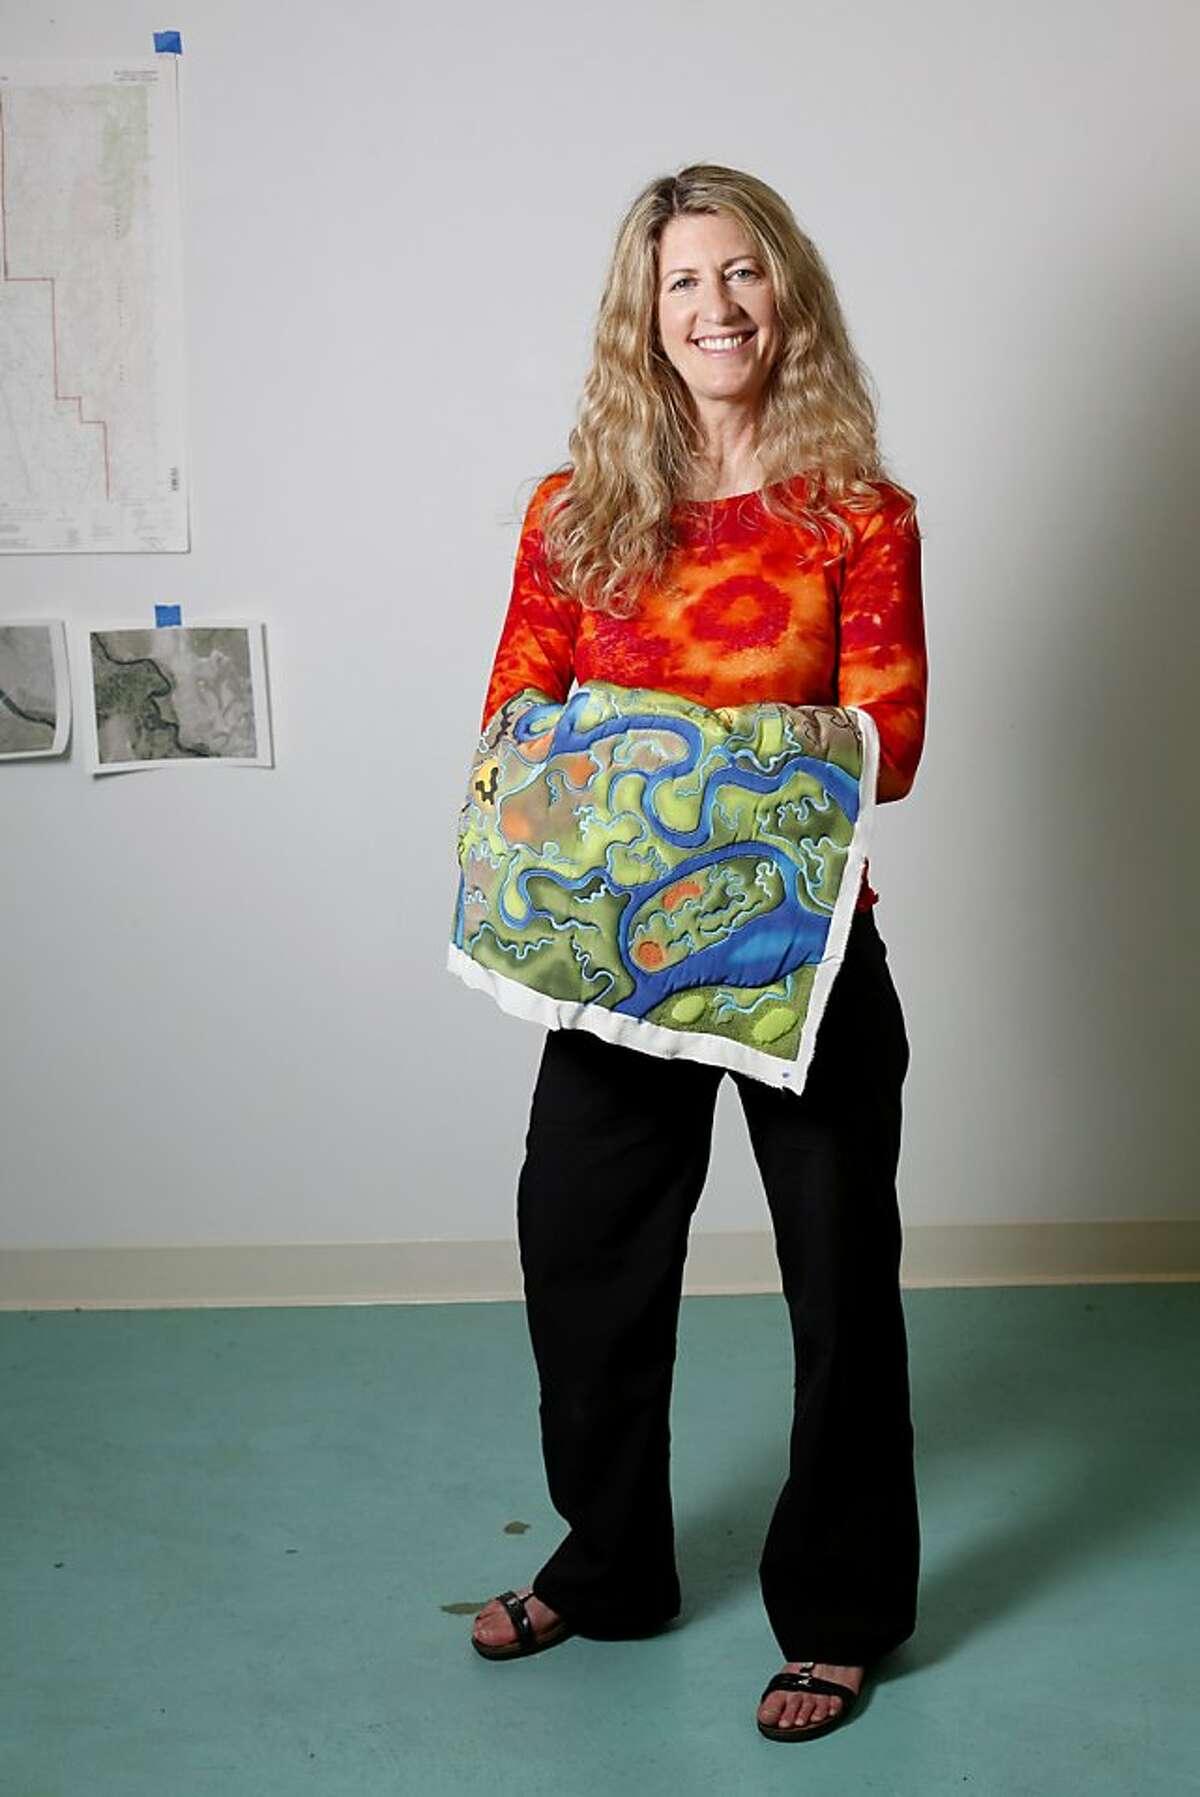 Linda Gass is an artist who creates stitched paintings on silk. She is photographed in her studio in Palo Alto, Calif., Tuesday, November 1, 2011. (**note - that is how she refers to her work, not as quilts**)(to be cut out)